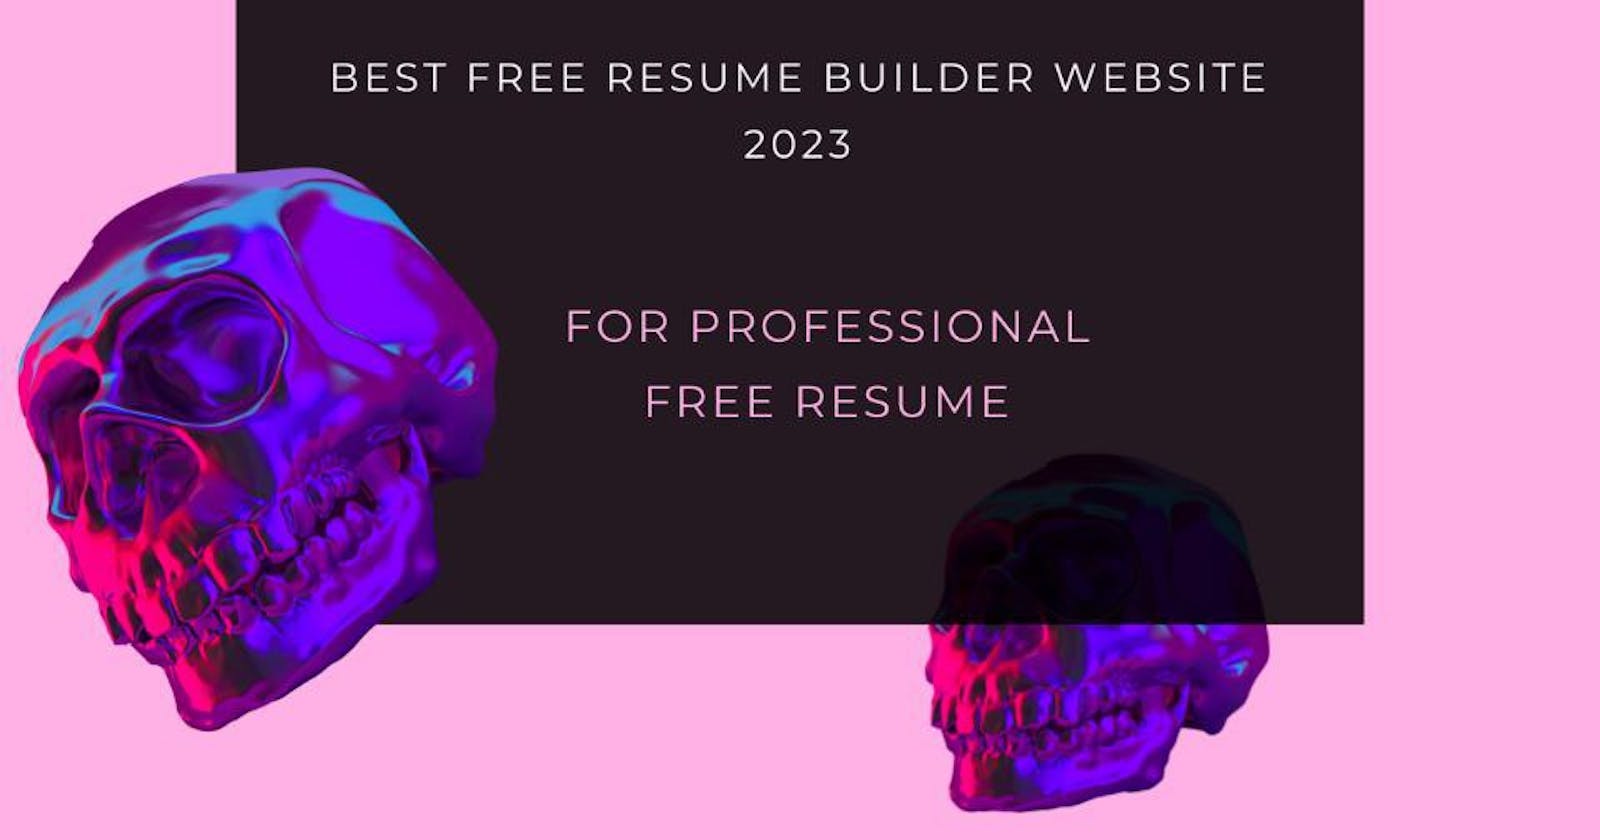 Craft Custom Resumes with Ease: Online Resume Makers